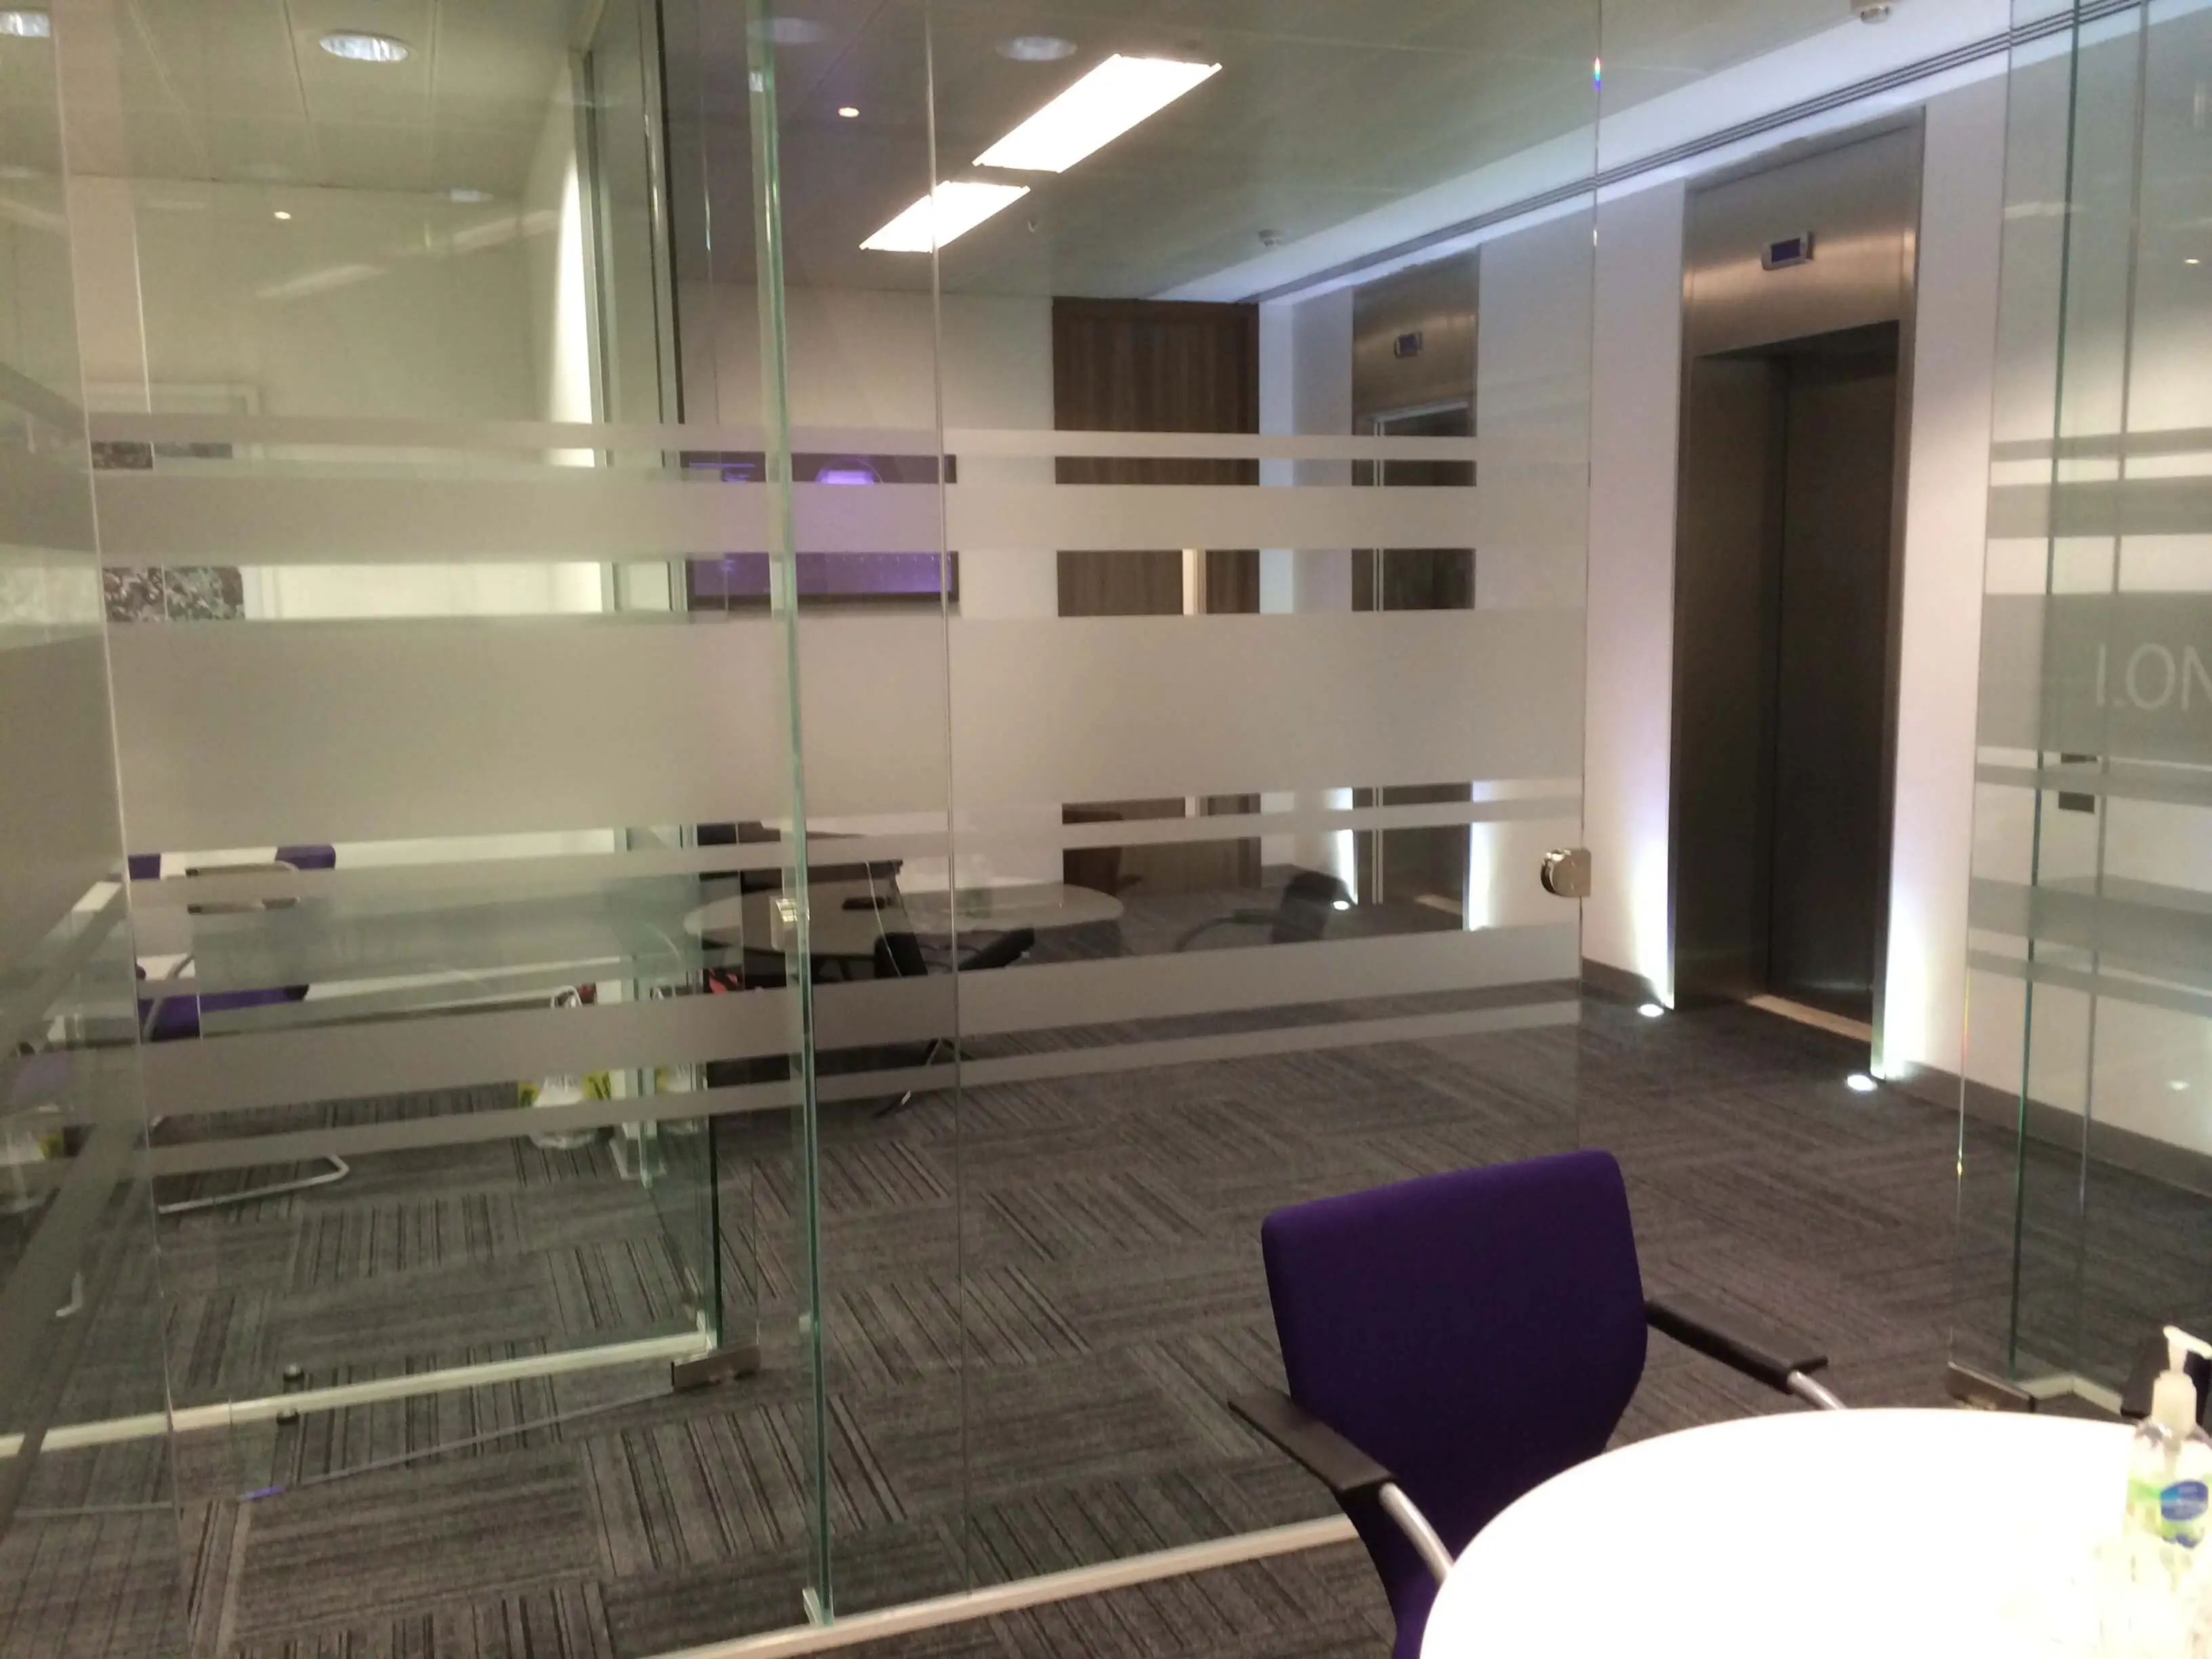 Waiting areas and meeting rooms spaces with glass partitions